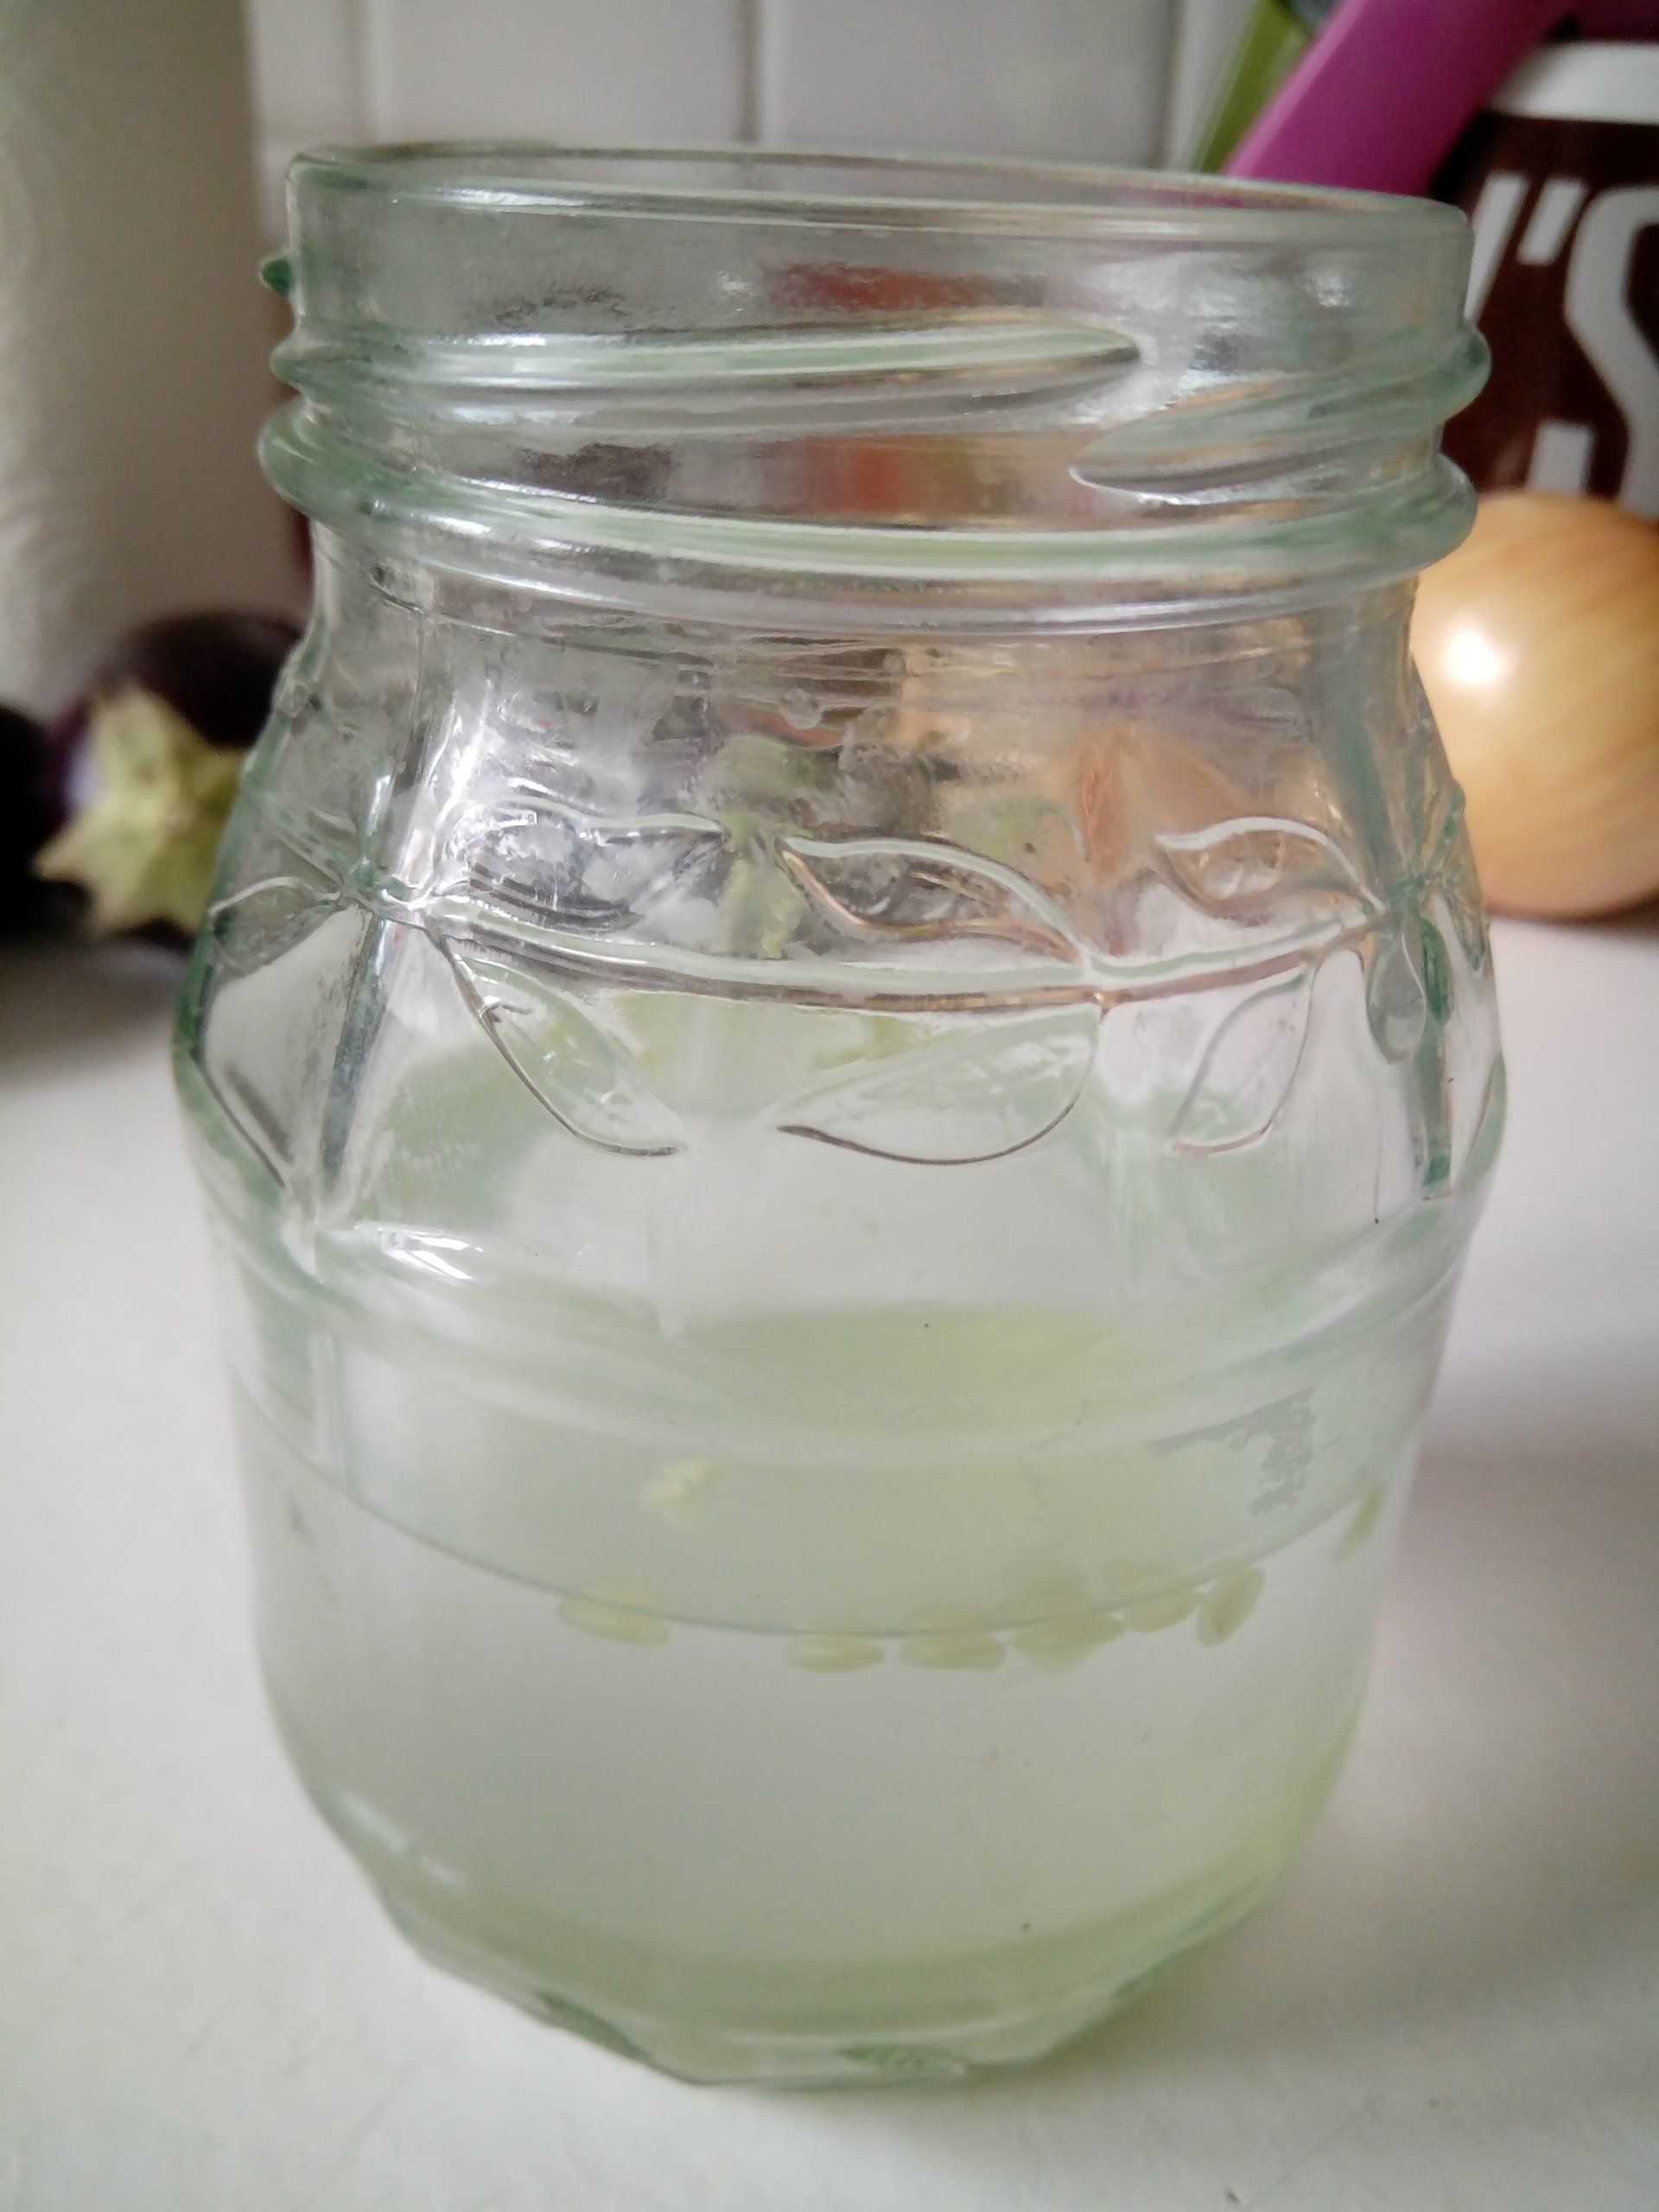 Cucamelon Seeds Fermenting in the Water in the Bottom of  a Jam Jar